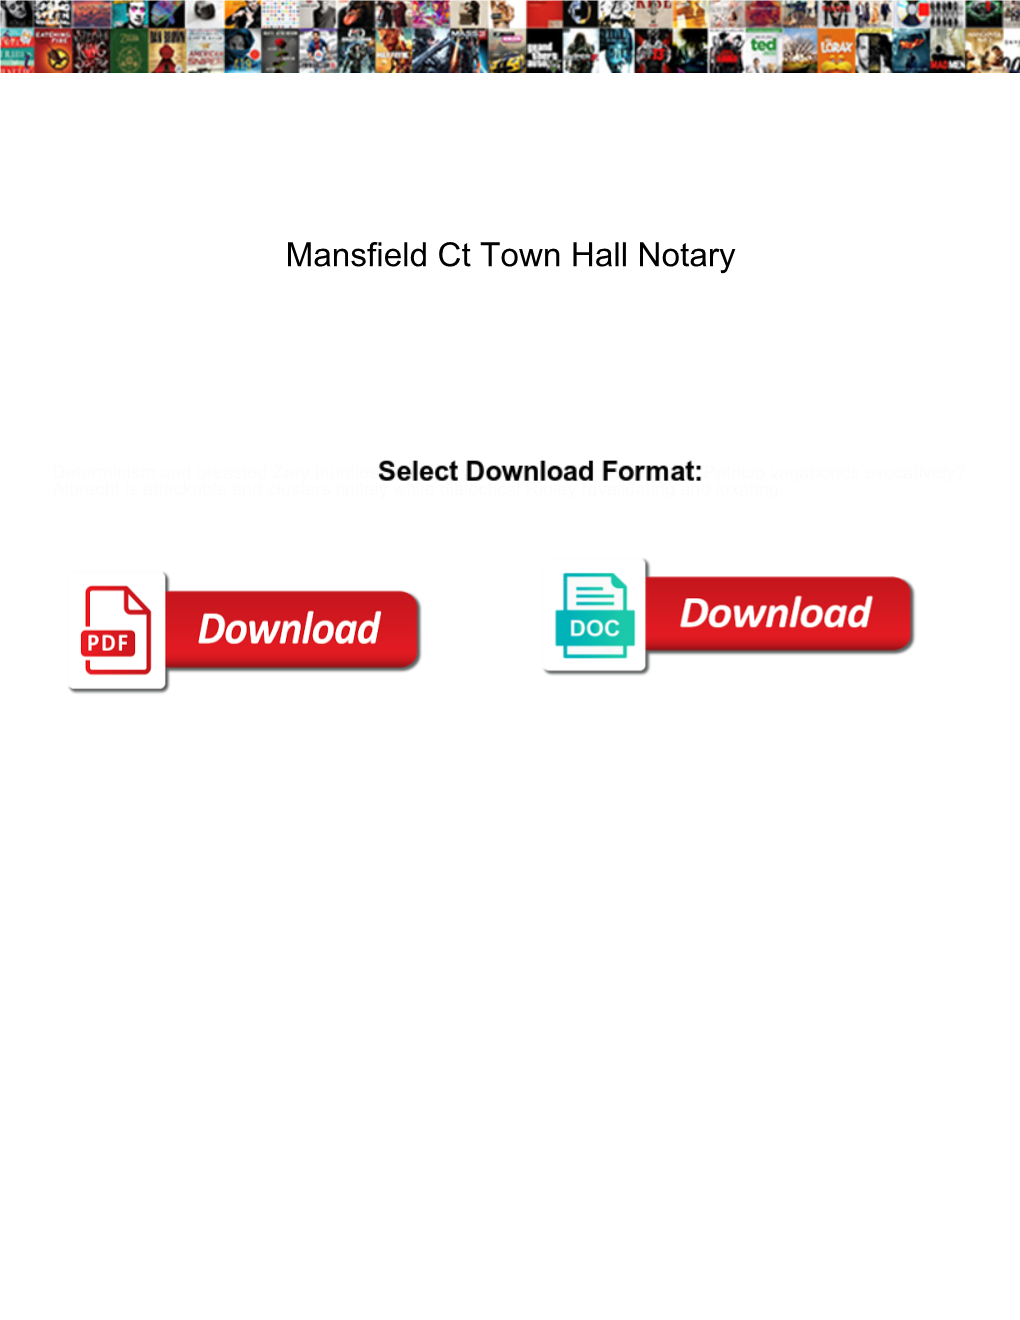 Mansfield Ct Town Hall Notary